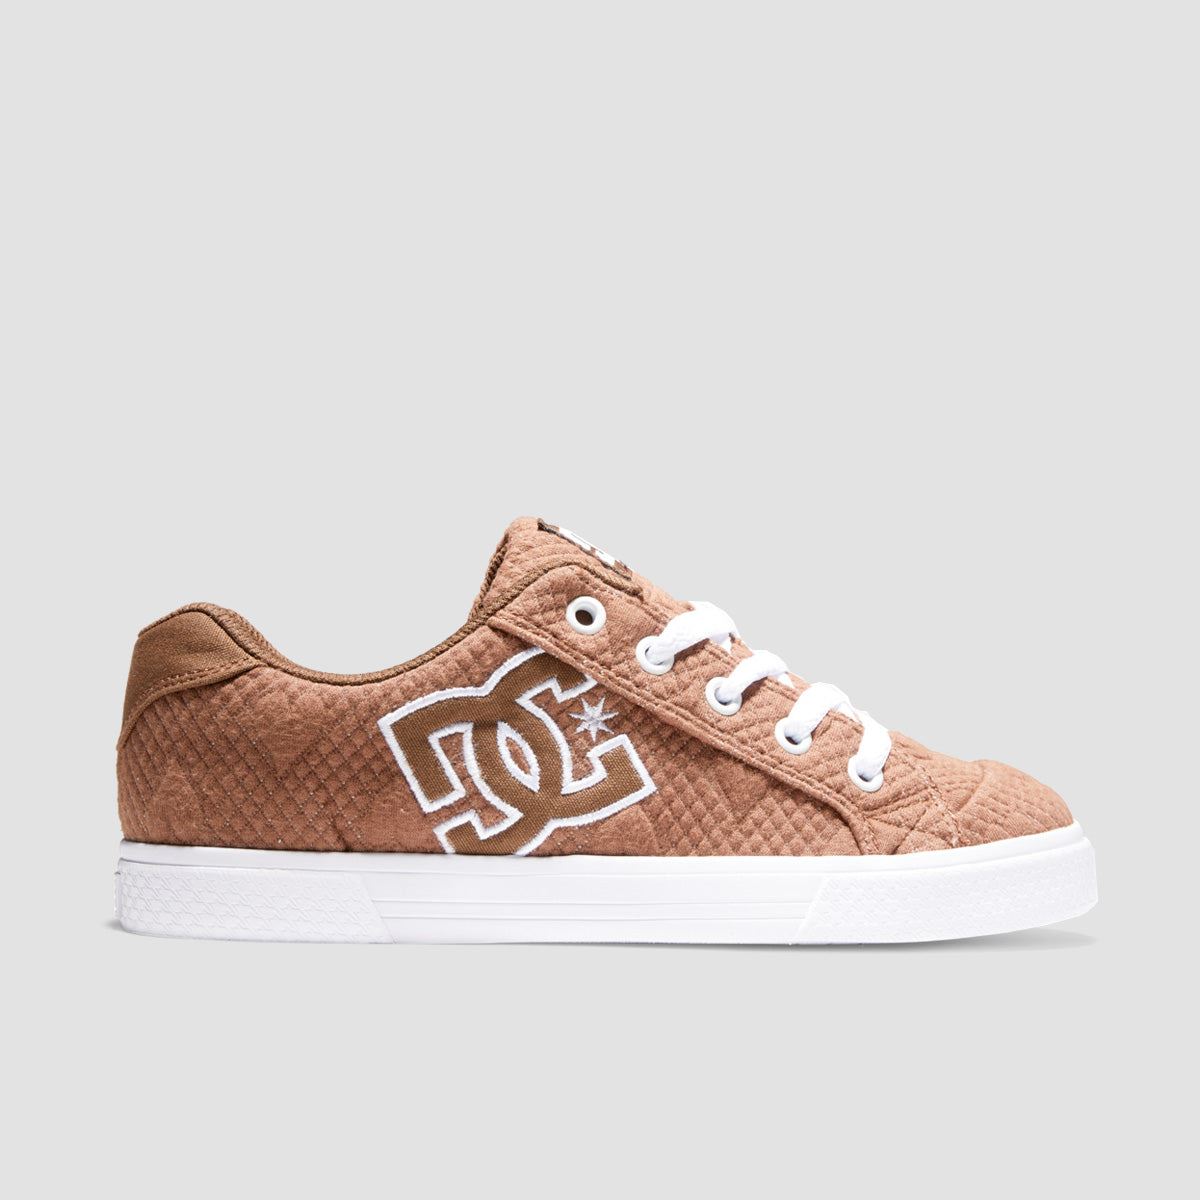 DC Chelsea Shoes - Brown - Womens